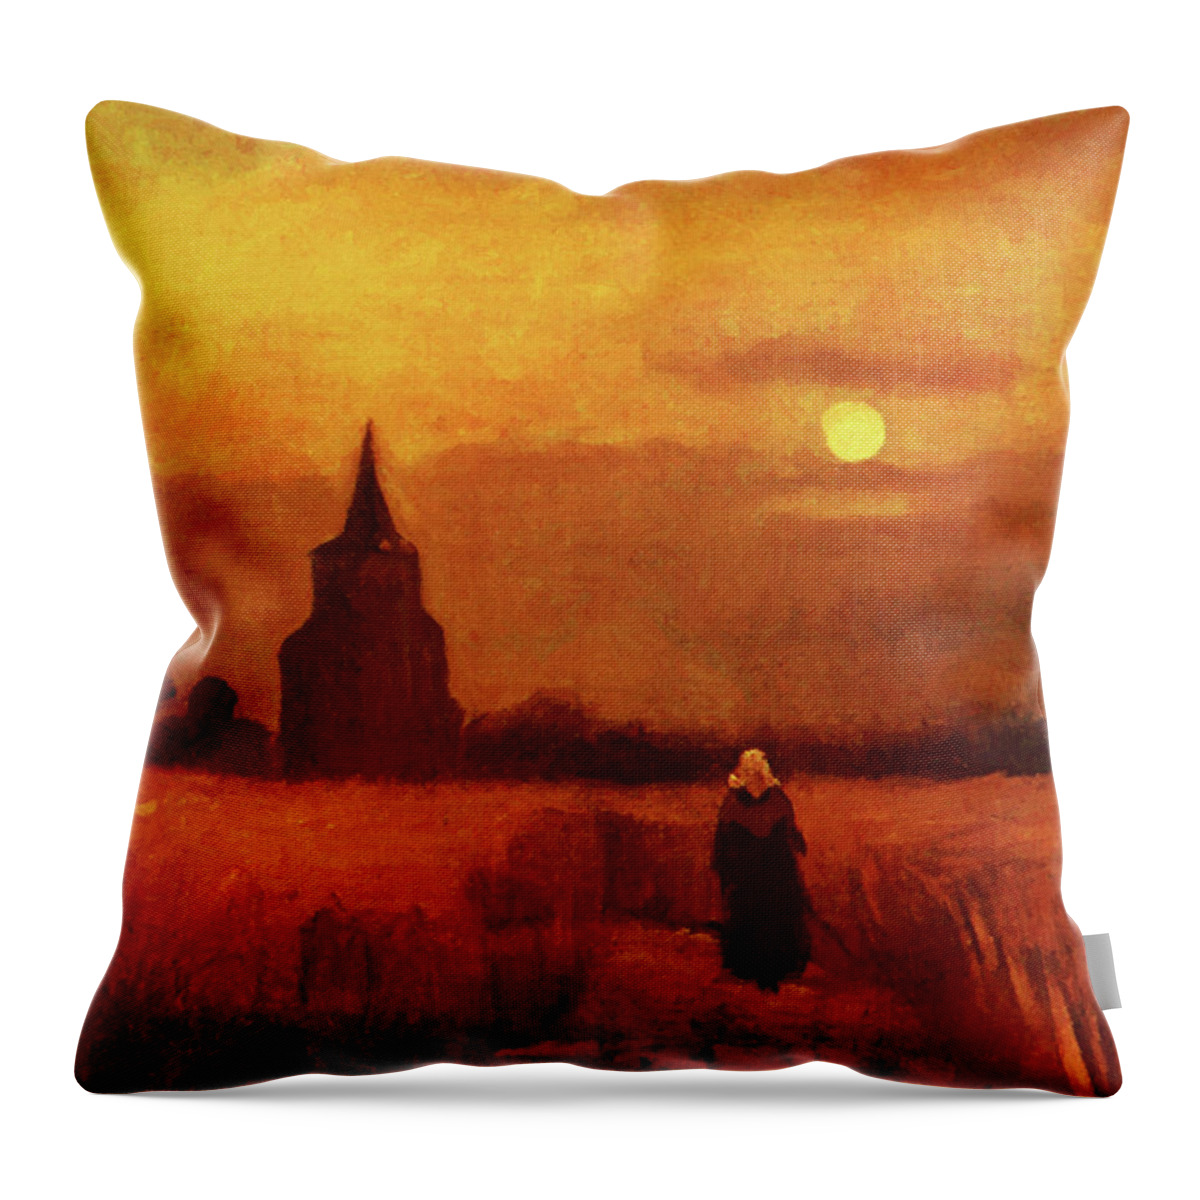 Vincent Van Gogh Throw Pillow featuring the painting The Old Tower In The Fields by Vincent Van Gogh